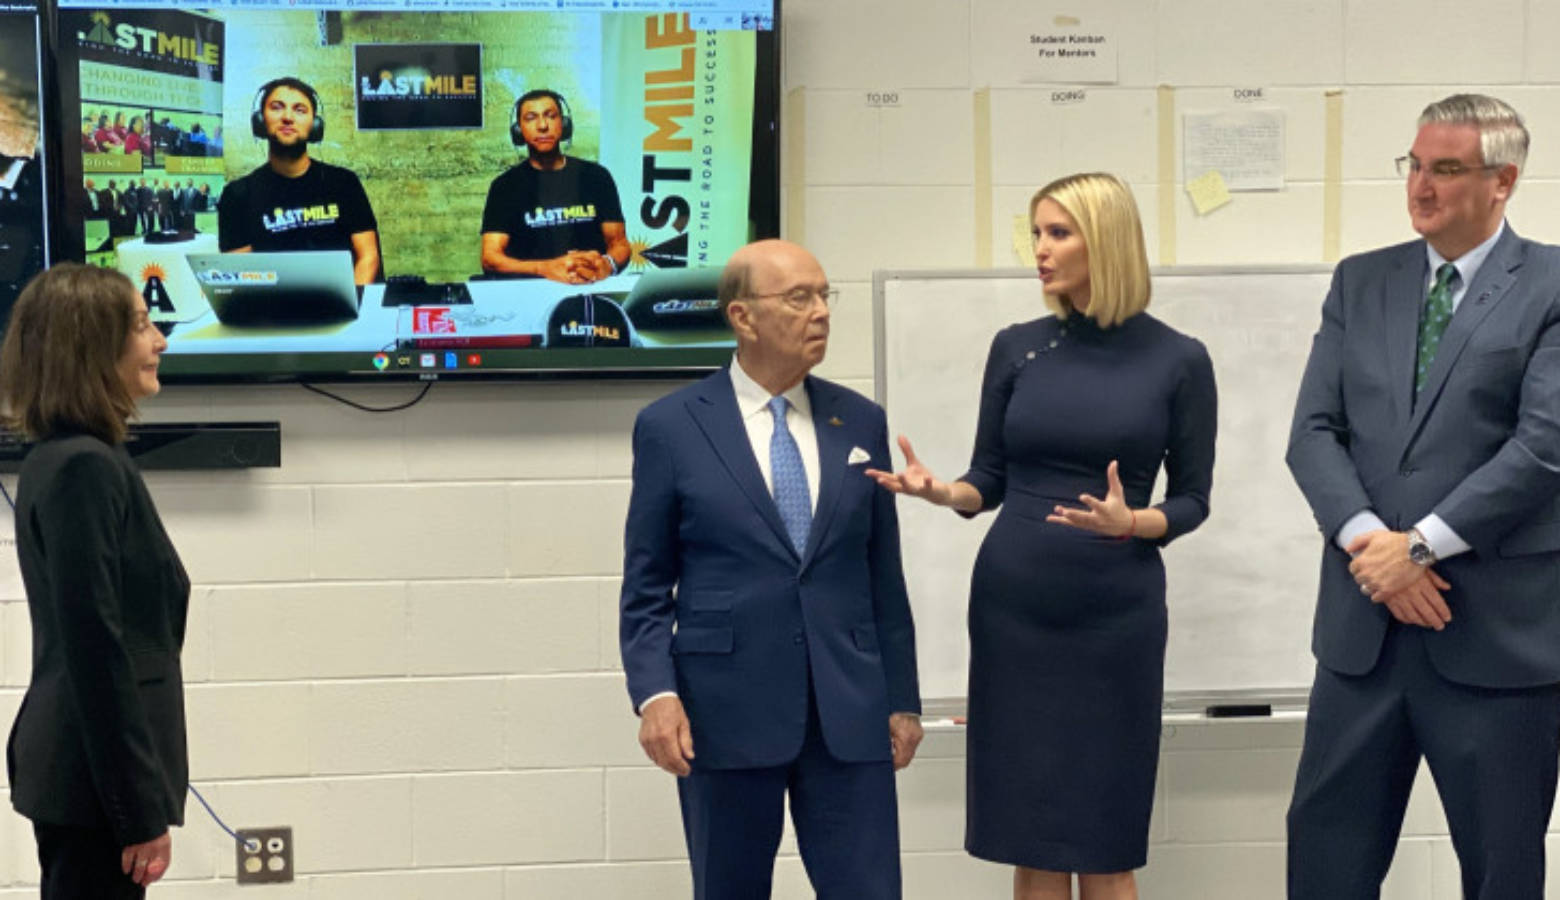 Adivisor to the President Ivanka Tump (second to the right) speaks with the Last Mile founder Beverly Parenti (far left). Trump is joined by Secretary of Commerce Wilbur Ross and Gov. Eric Holcomb (far right).